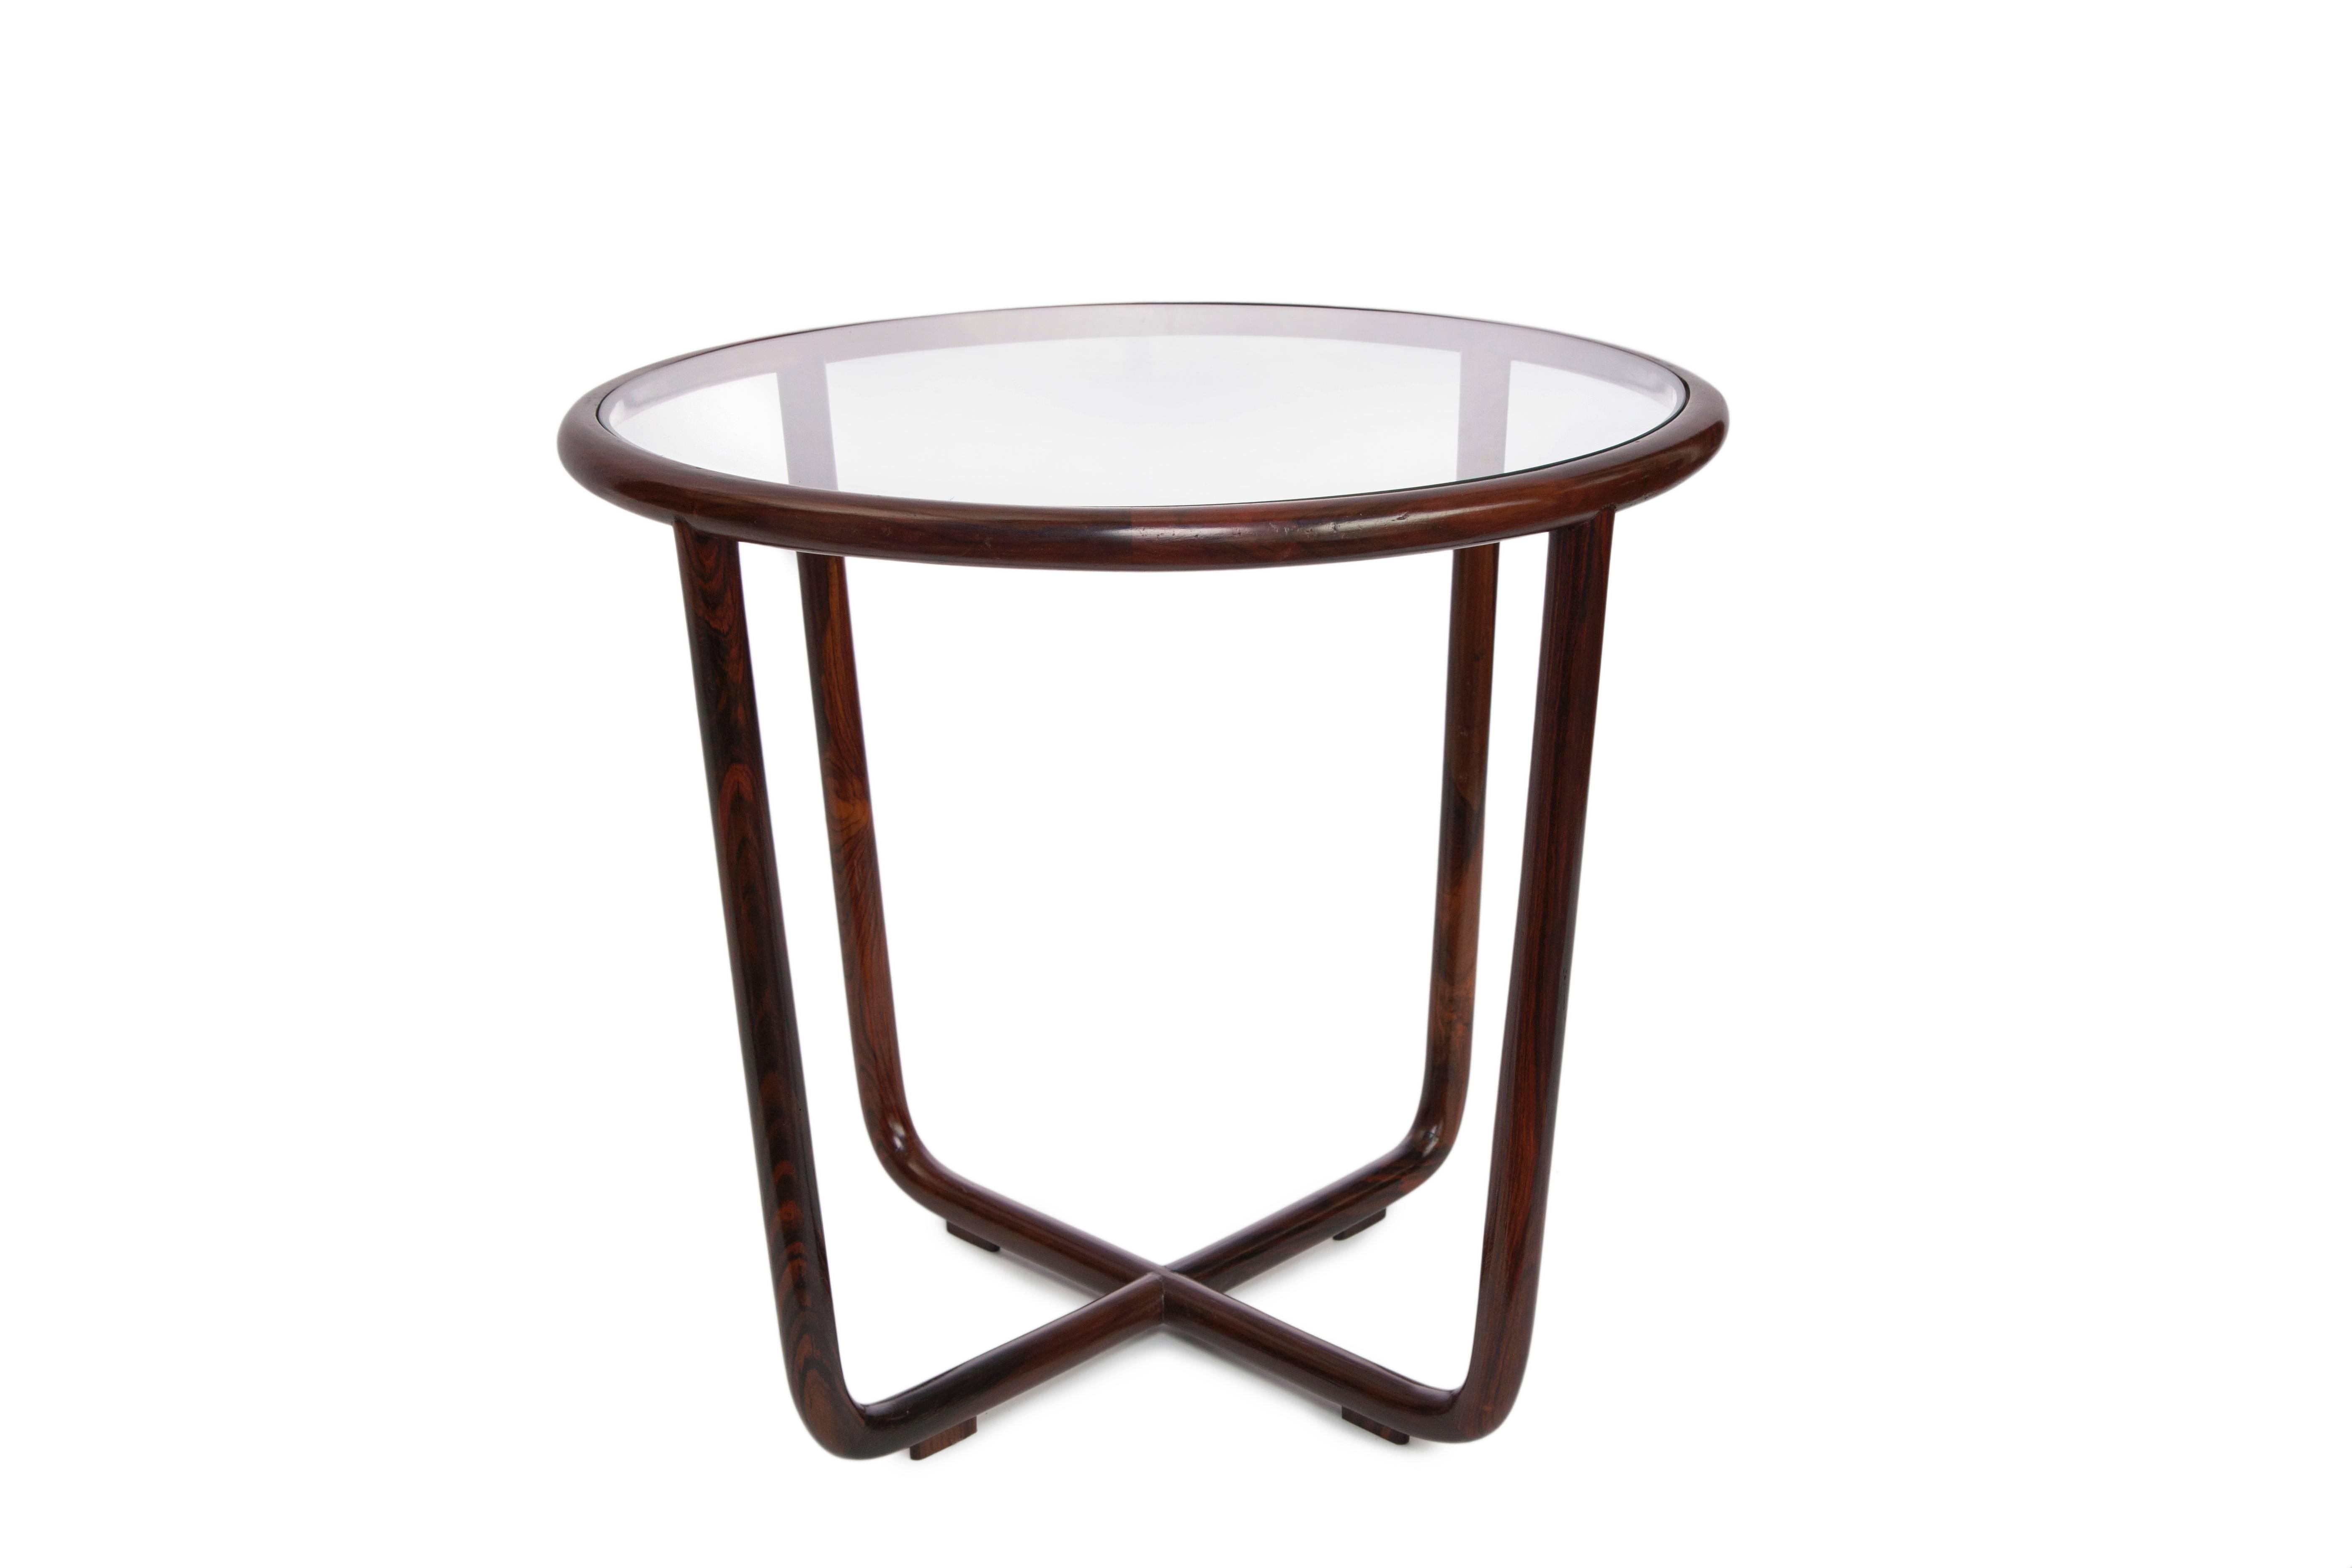 A pair of Brazilian jacaranda wood side tables by Joaquim Tenreiro, produced circa 1950s, with glass tops against round frames in the Minimalist modern style, bases with intersecting legs. Excellent vintage condition, consistent with age and